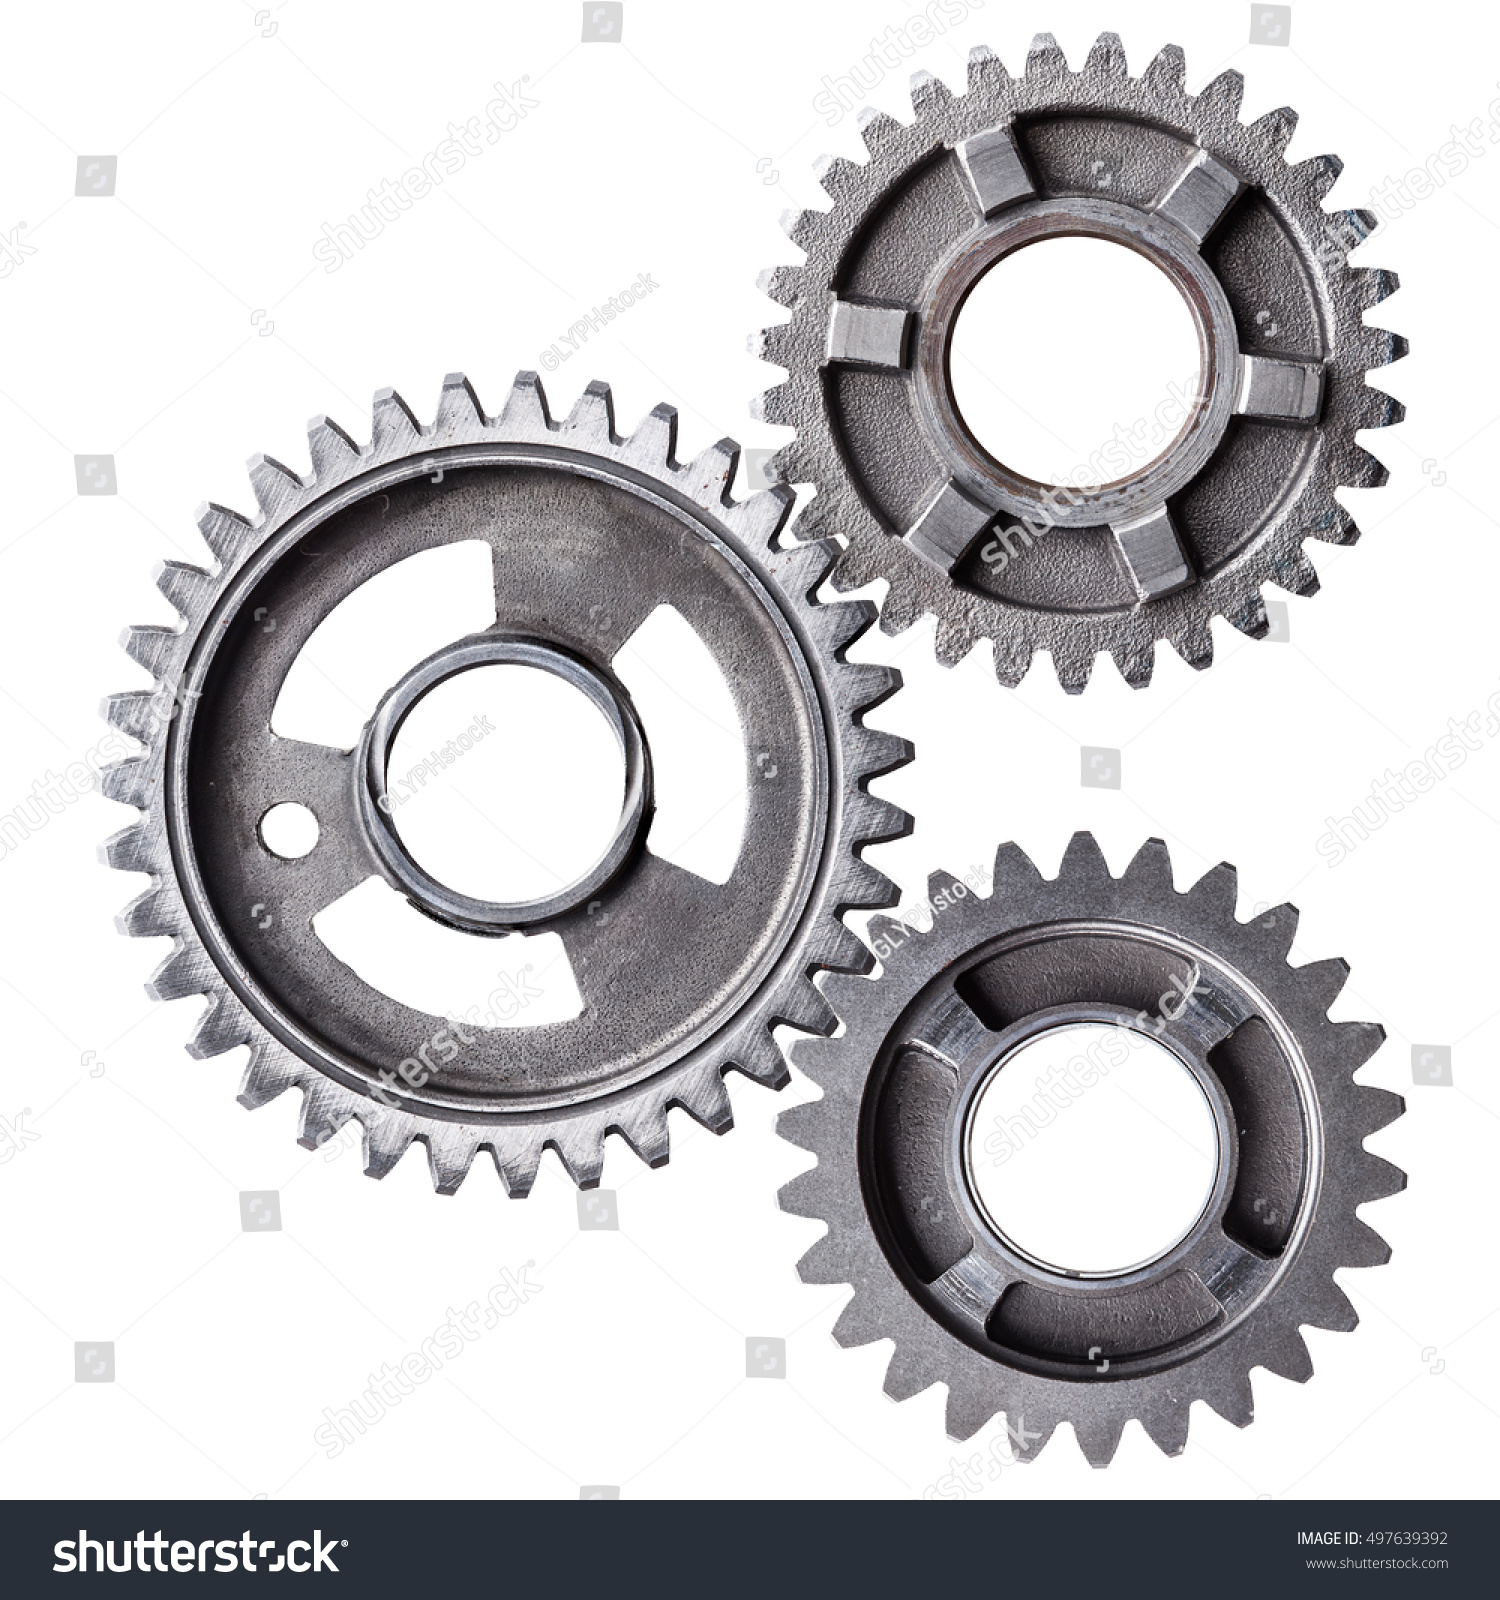 Cluster Interlocking Metal Gears Isolated On Stock Photo 497639392